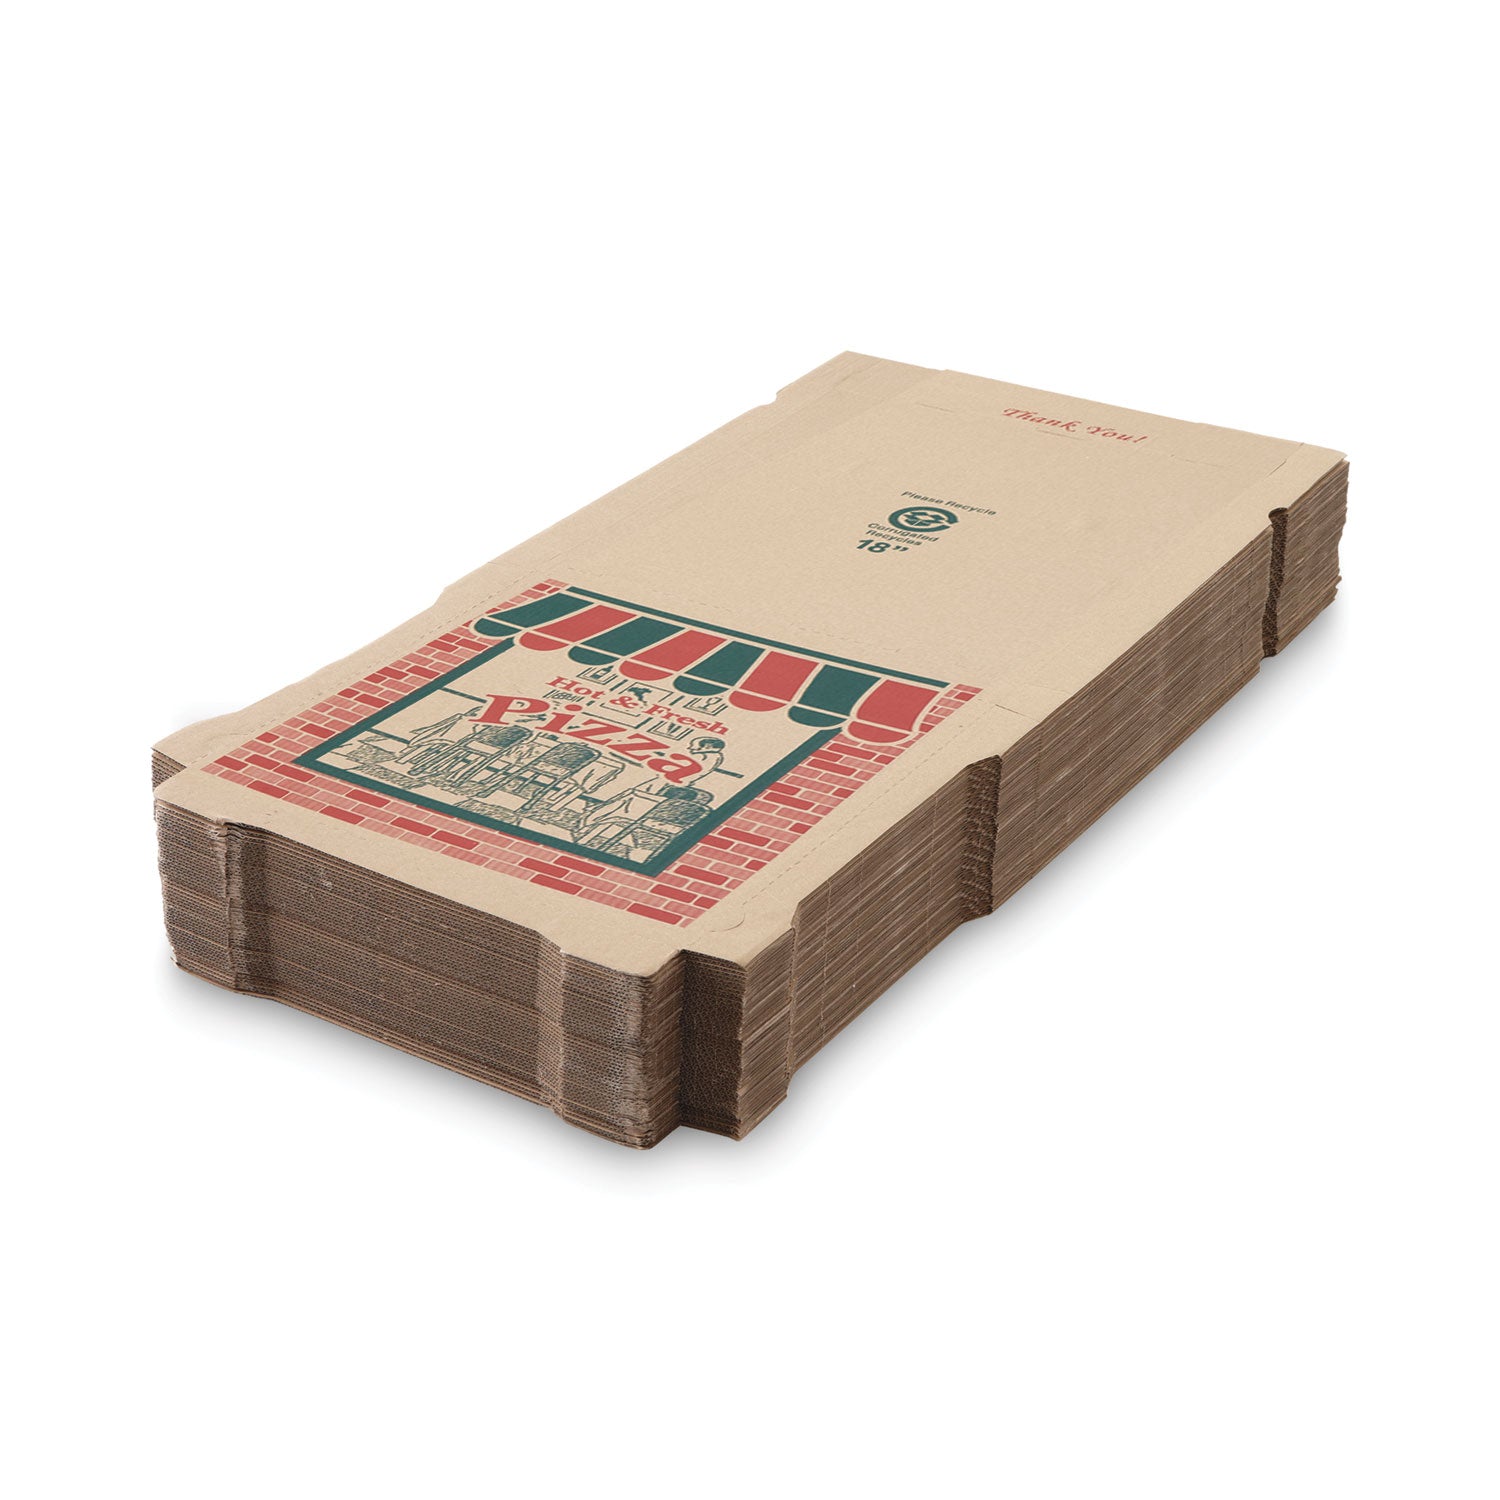 corrugated-pizza-boxes-storefront-14-x-14-x-175-brown-red-green-paper-50-carton_arv7142504 - 4